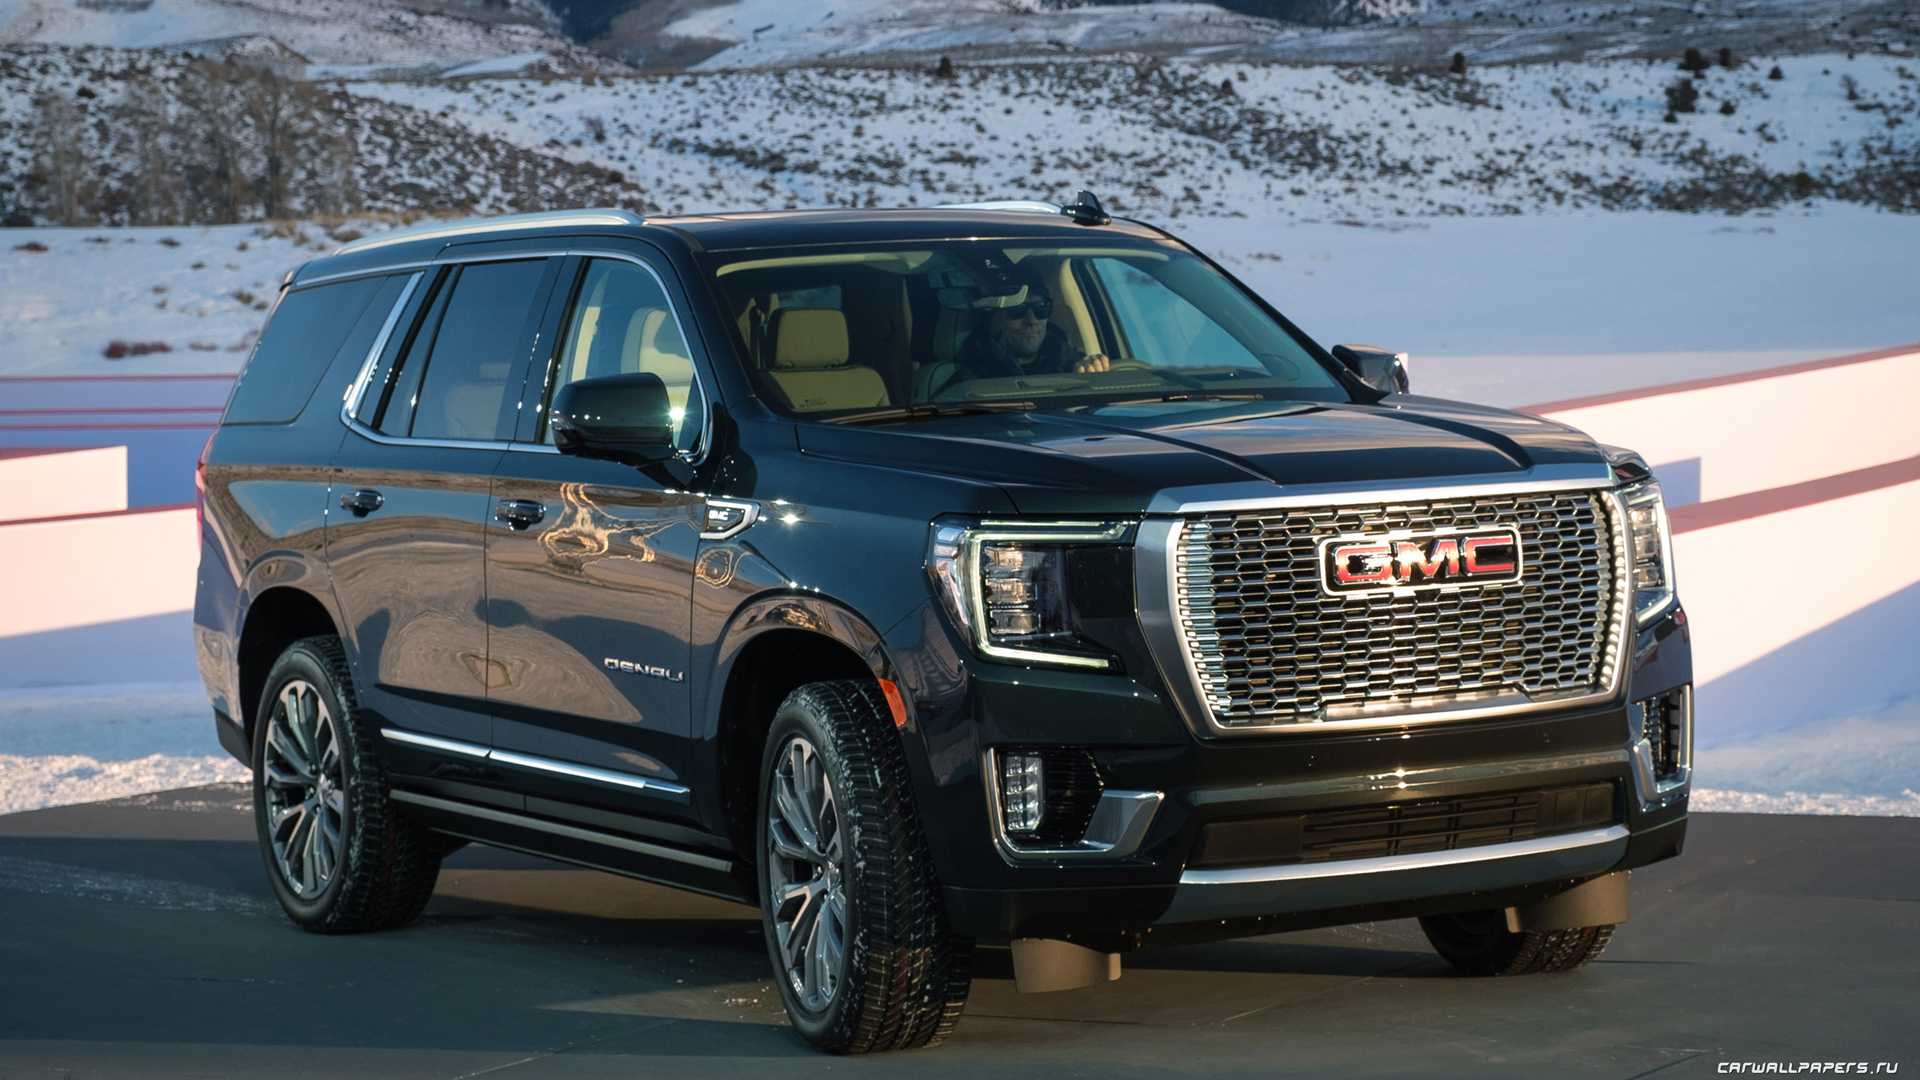 All about 2023 gmc yukon: denali ultimate, at4x, electric model, diesel specs